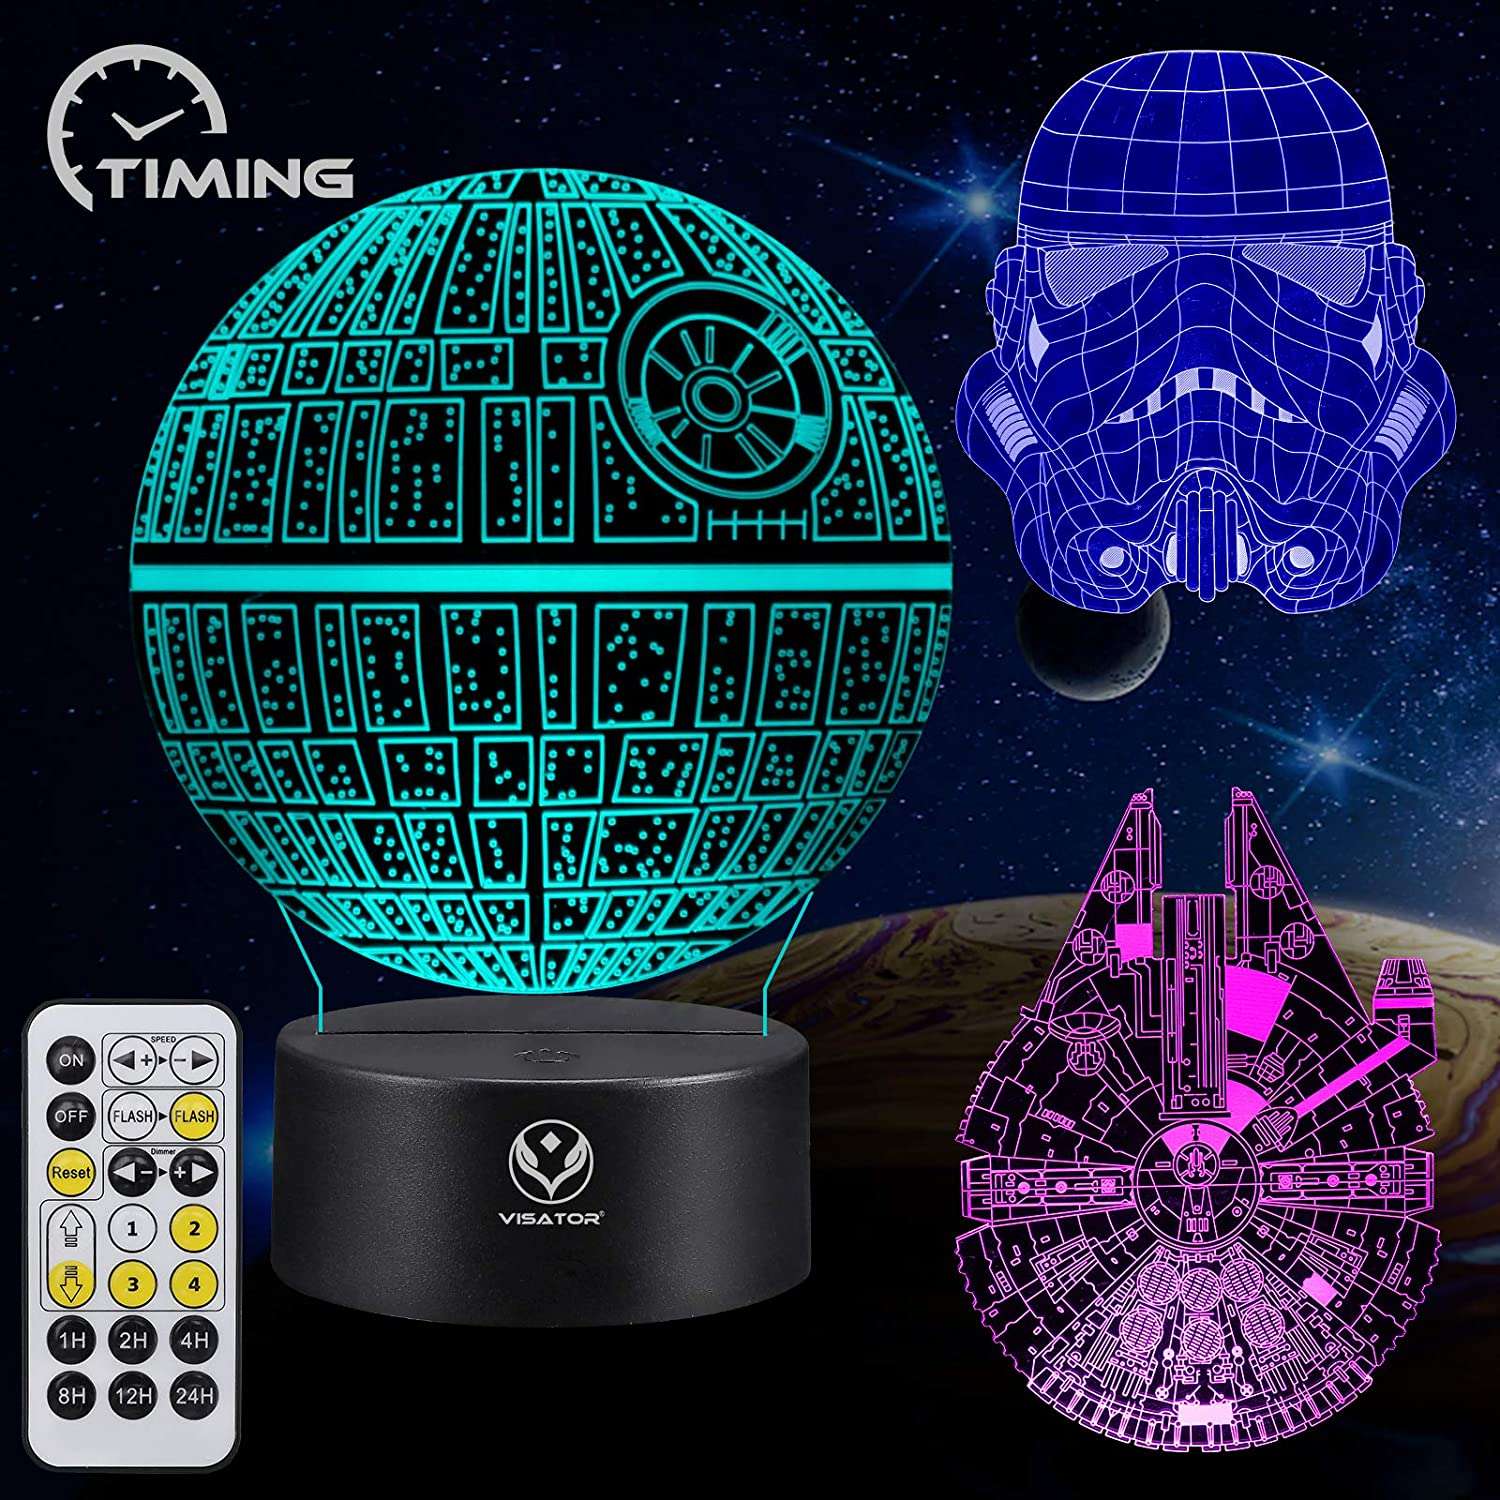 star wars illusion lamp toy 7 colors changing dimmable with smart touch and timing remote control